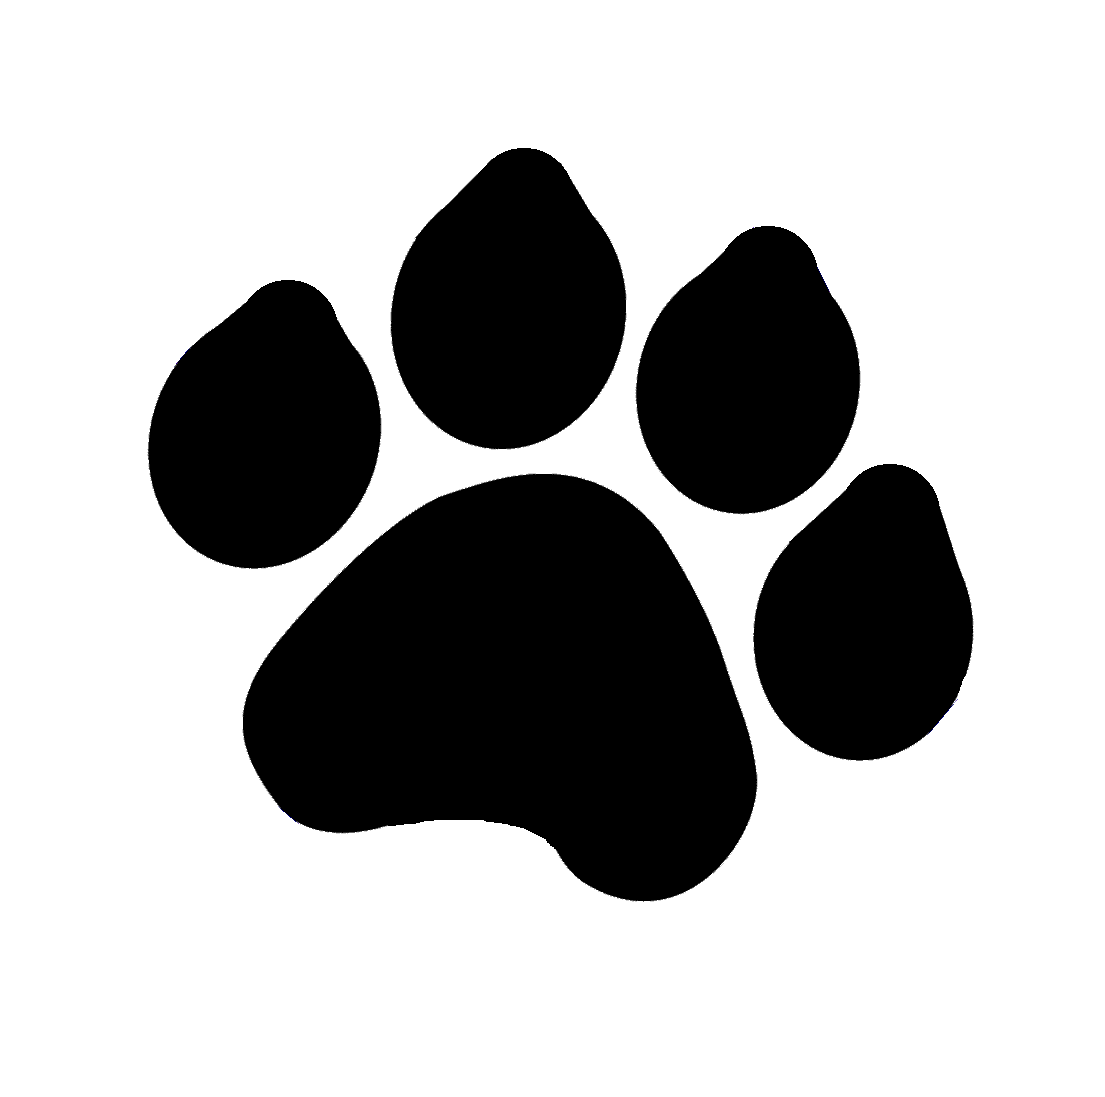 32 Paw Print Gif Free Cliparts That You Can Download To You Computer    